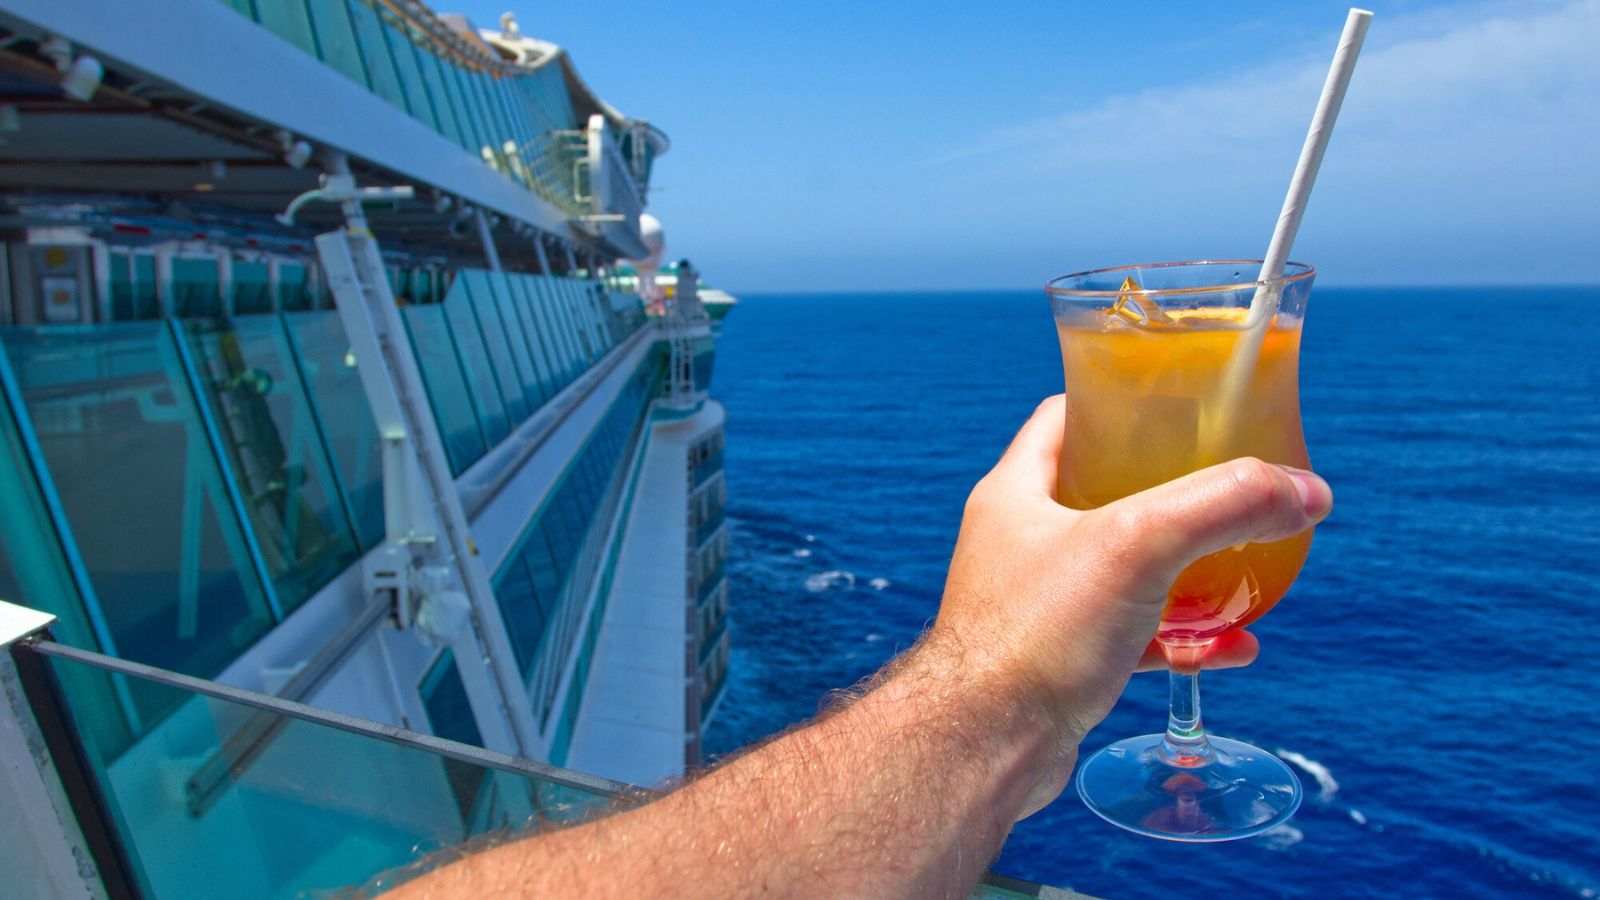 <p>As part of your pre-cruise price hunting, search for cruises with incentives, like all-inclusive offers. For instance, can you get a package with drinks and internet access thrown in? Or can you get free food and entertainment as part of the room rate?</p><p>Even if you pay extra when booking, it may still be cheaper than buying the base fare now and then everything else when you’re on board.</p>